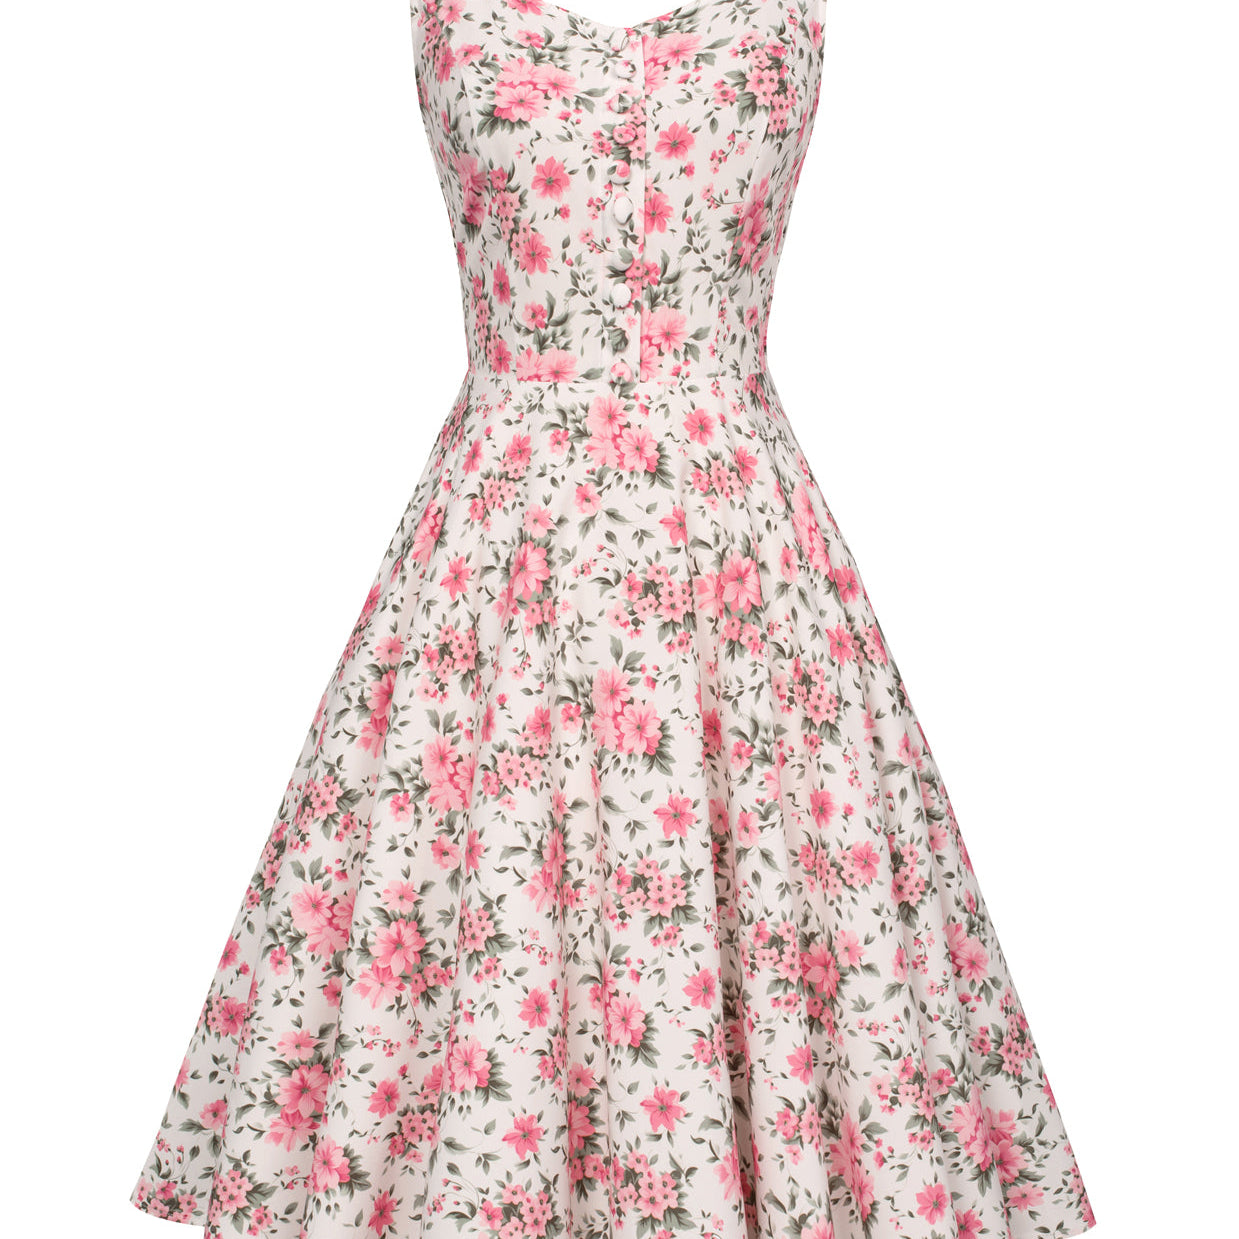 1950s Retro Vintage Floral Patterns Sleeveless Homecoming Dresses